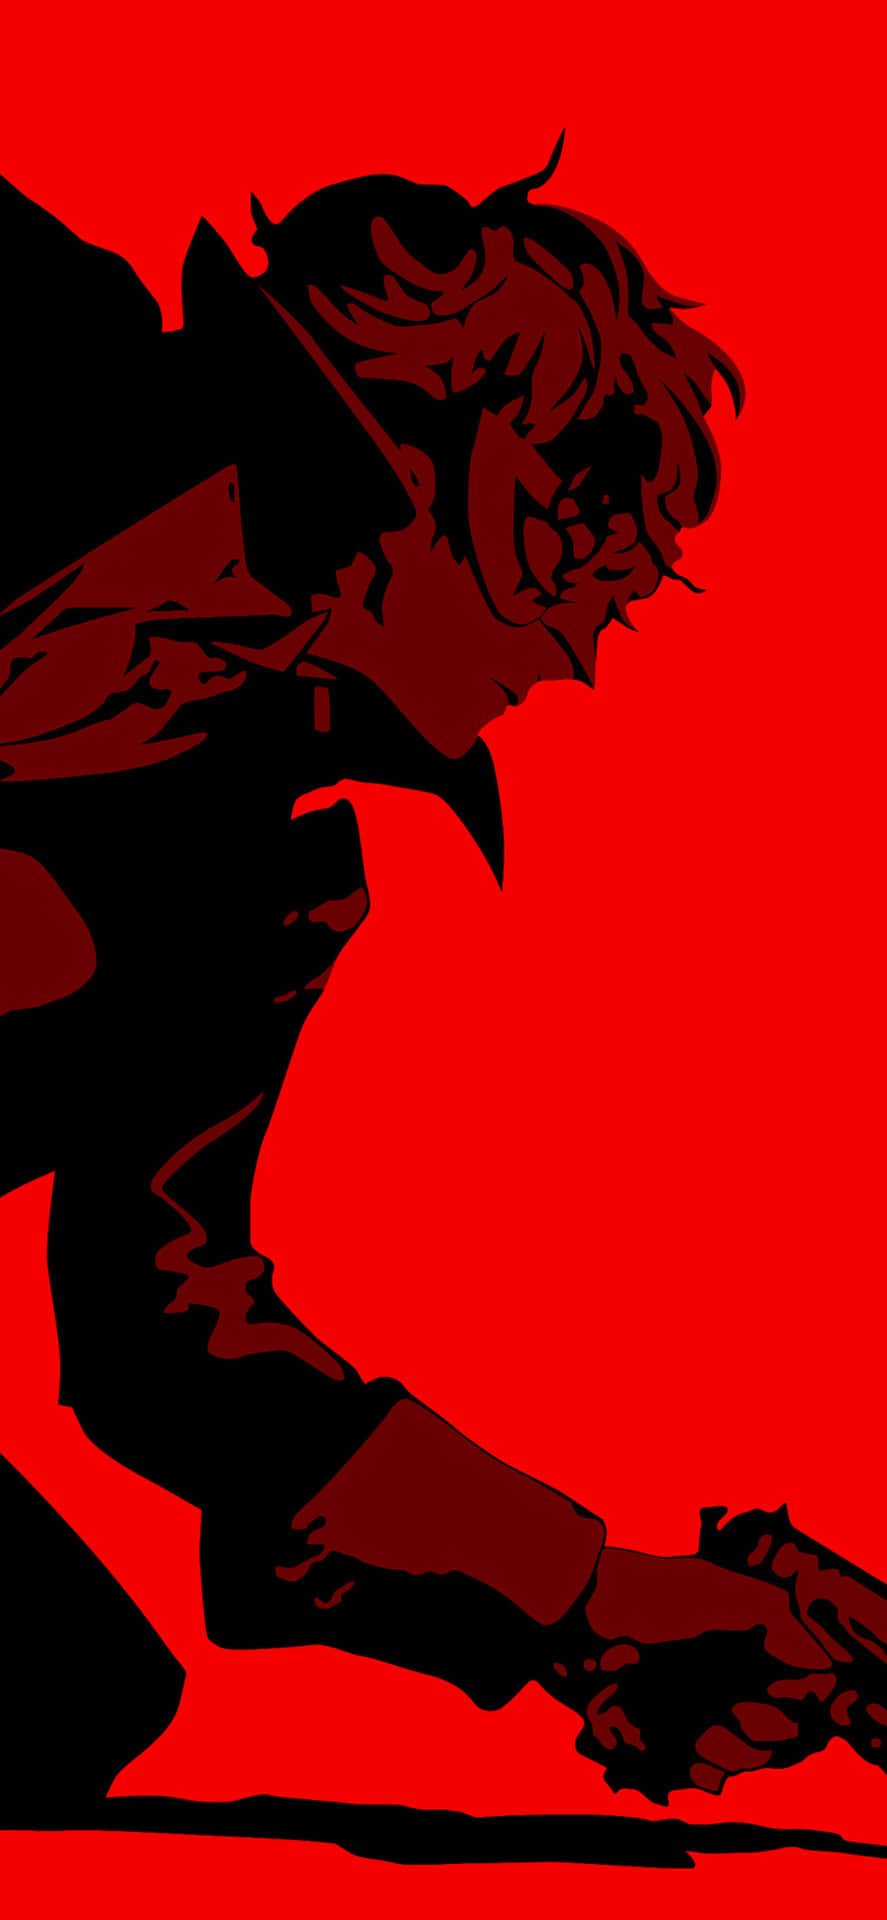 Immerse yourself in the world of Persona 5 with the iPhone. Wallpaper